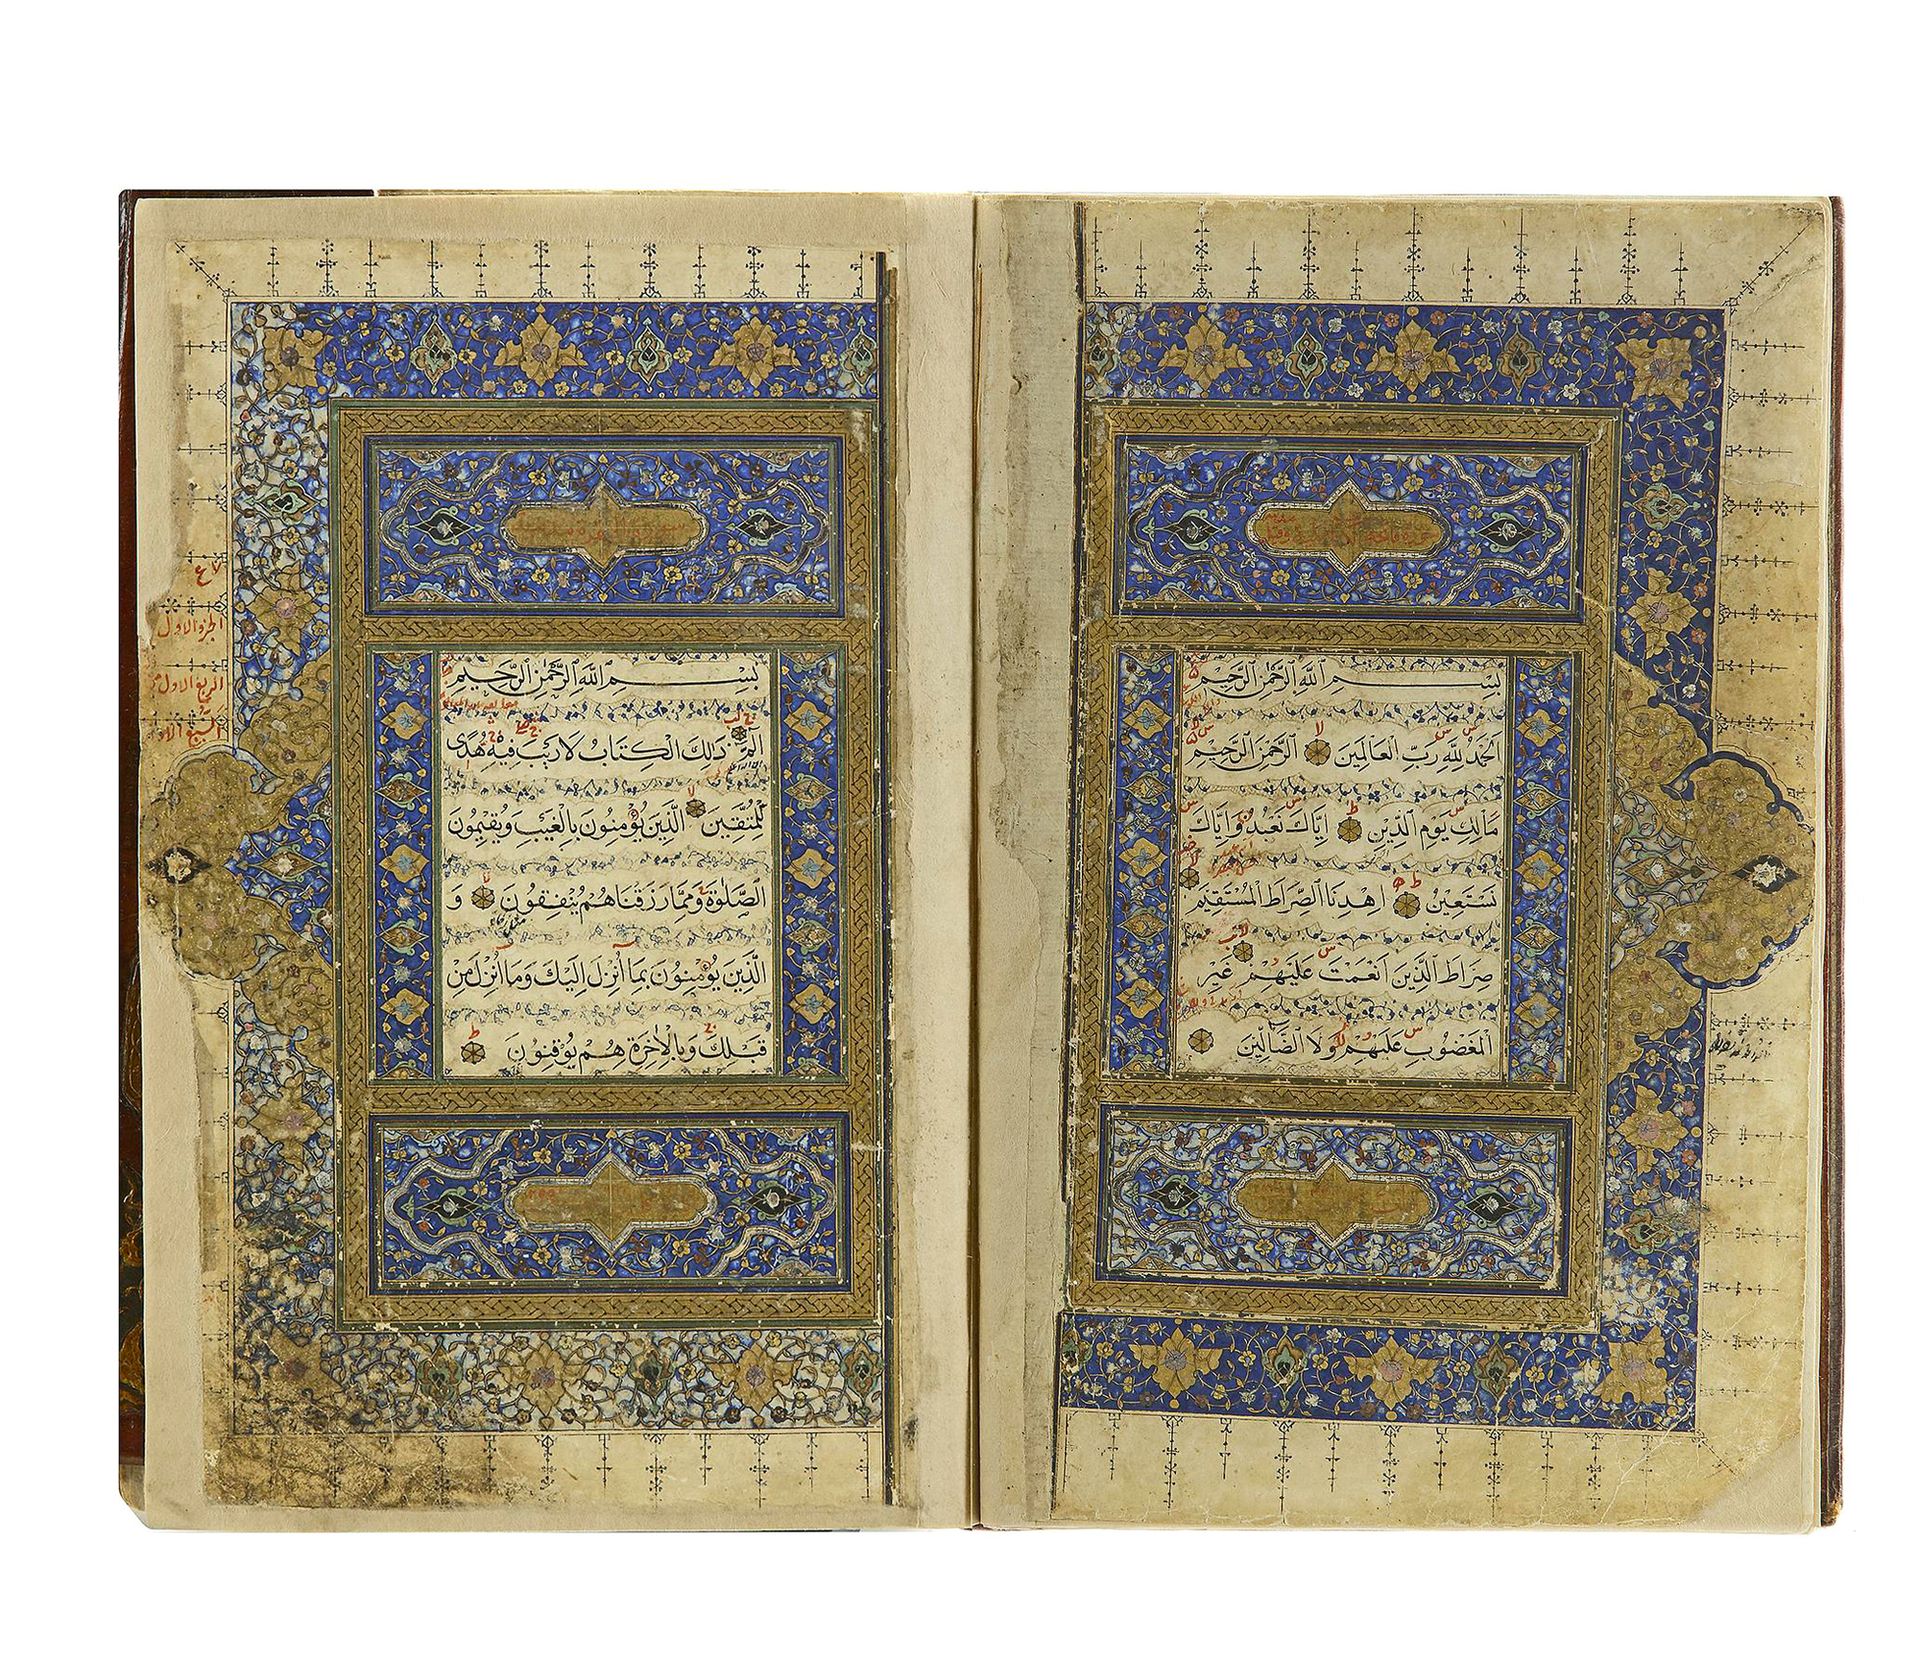 A HIGHLY ILLUMINATED QURAN BY THE MASTER CALLIGRAPHER DOST MUHAMMAD BUKHARI, 16T&hellip;